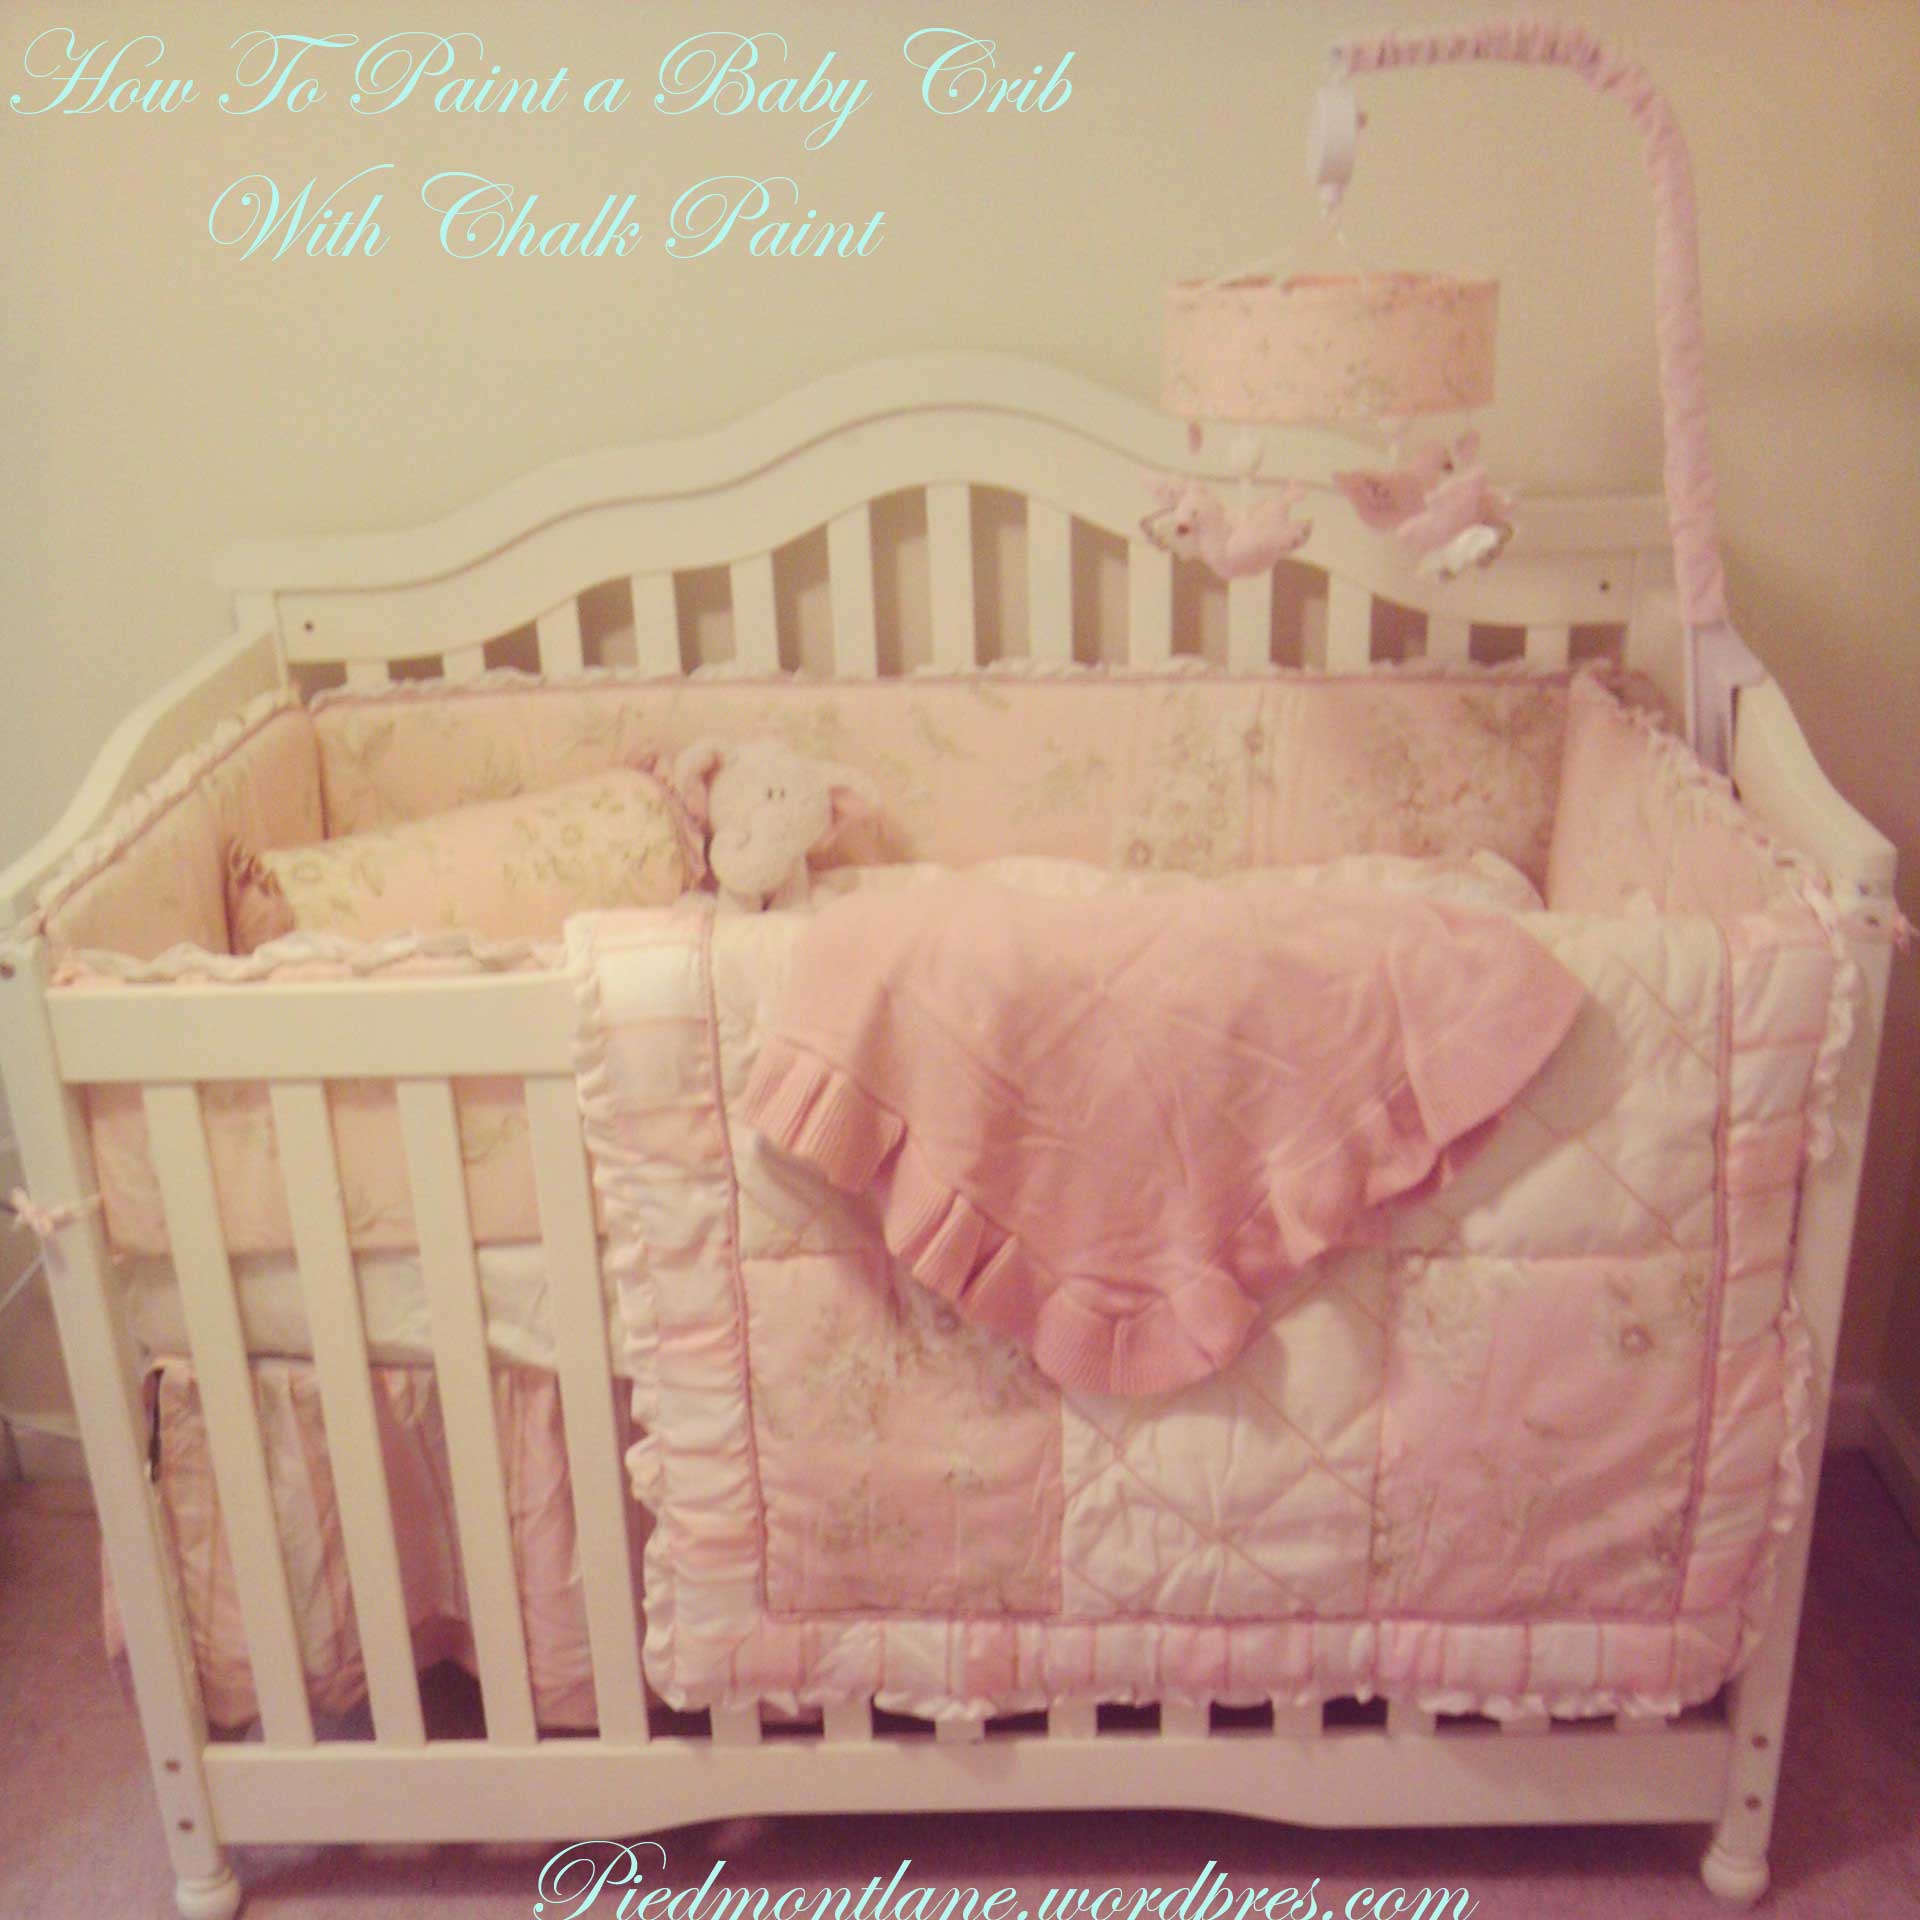 baby friendly paint for cot